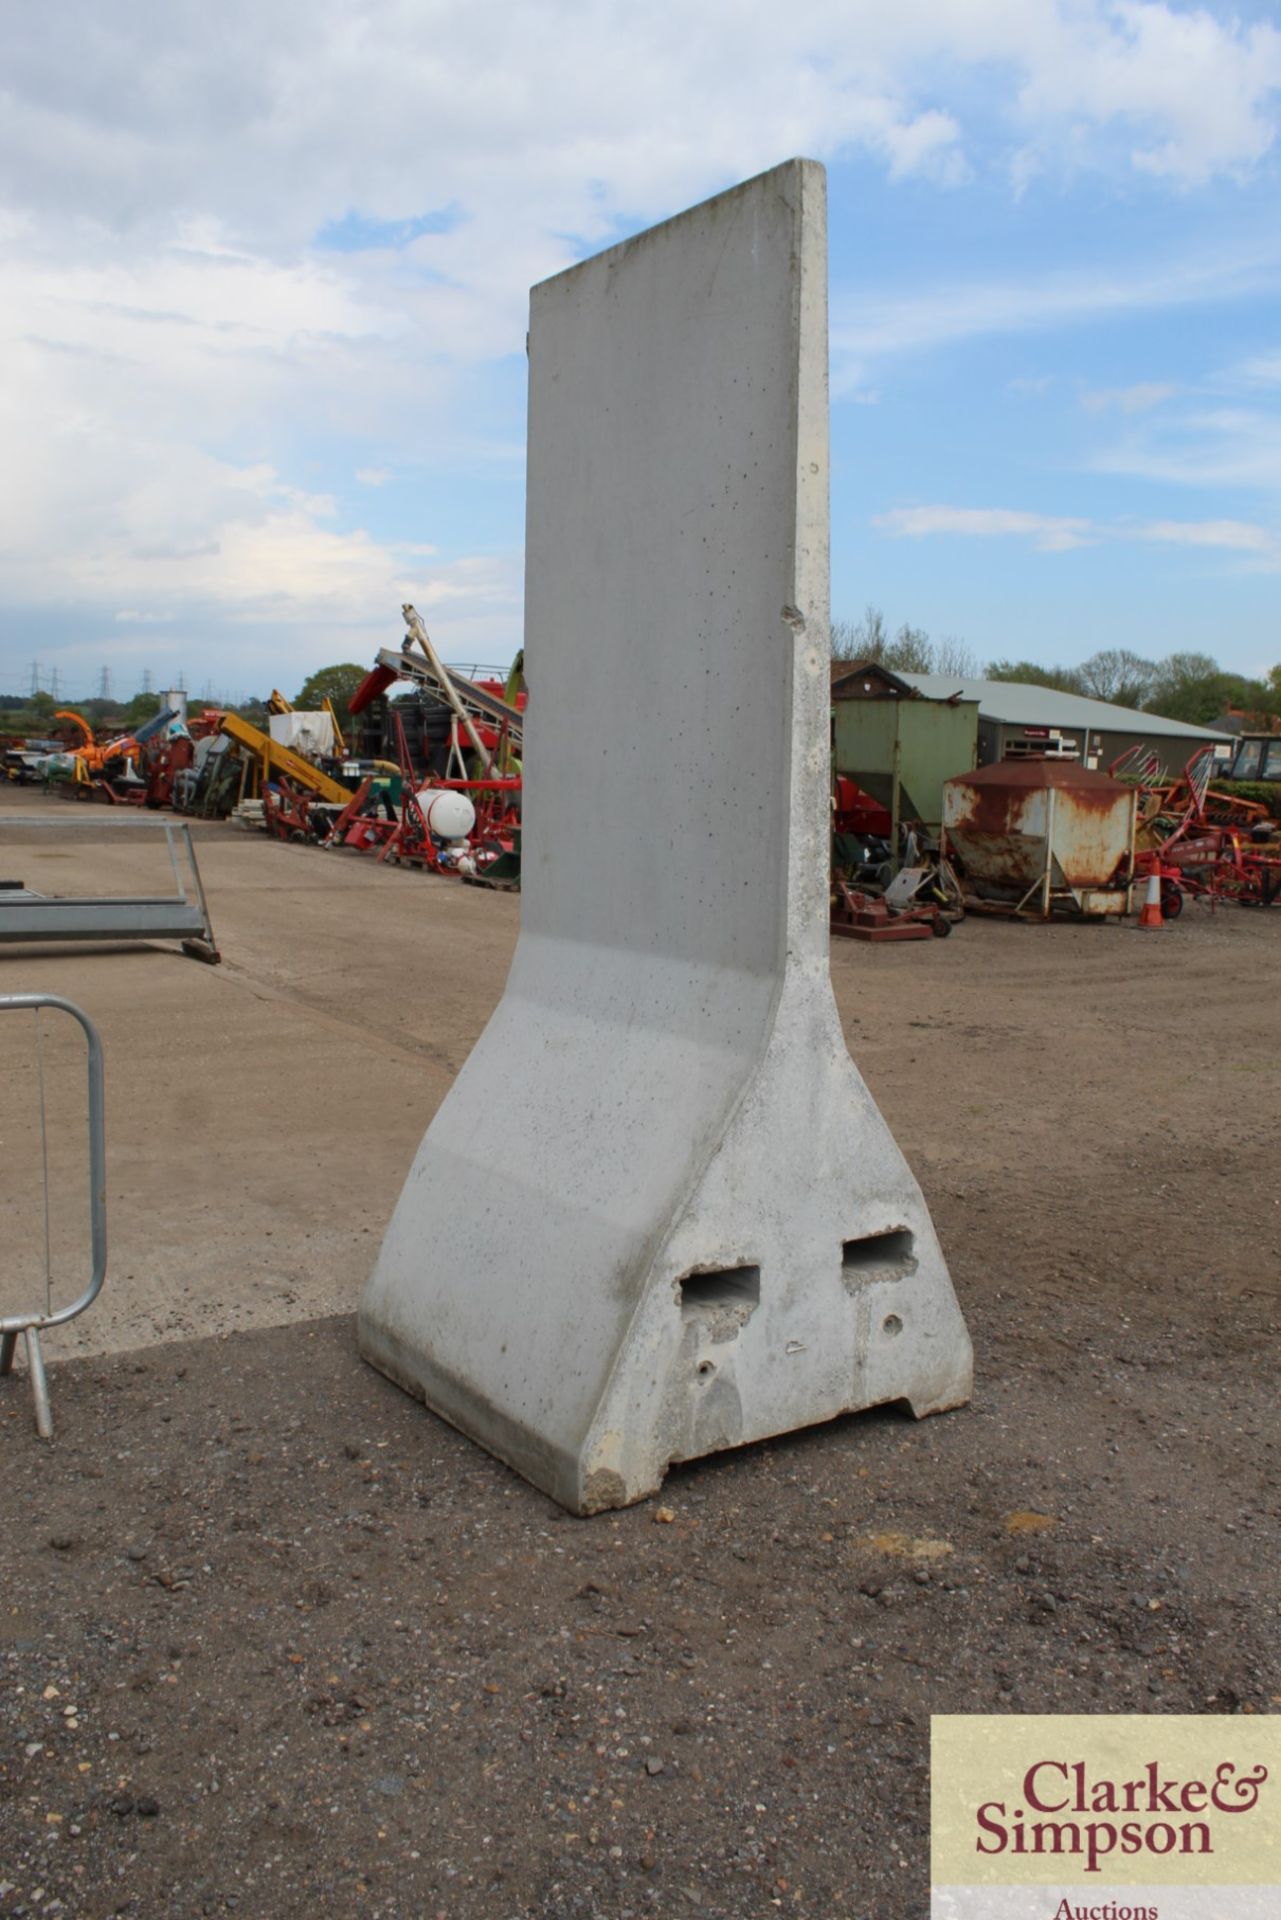 15x Taperbloc XL 3m concrete section A-frame walling. Remainder to be collected from Sibton. Loading - Image 4 of 6